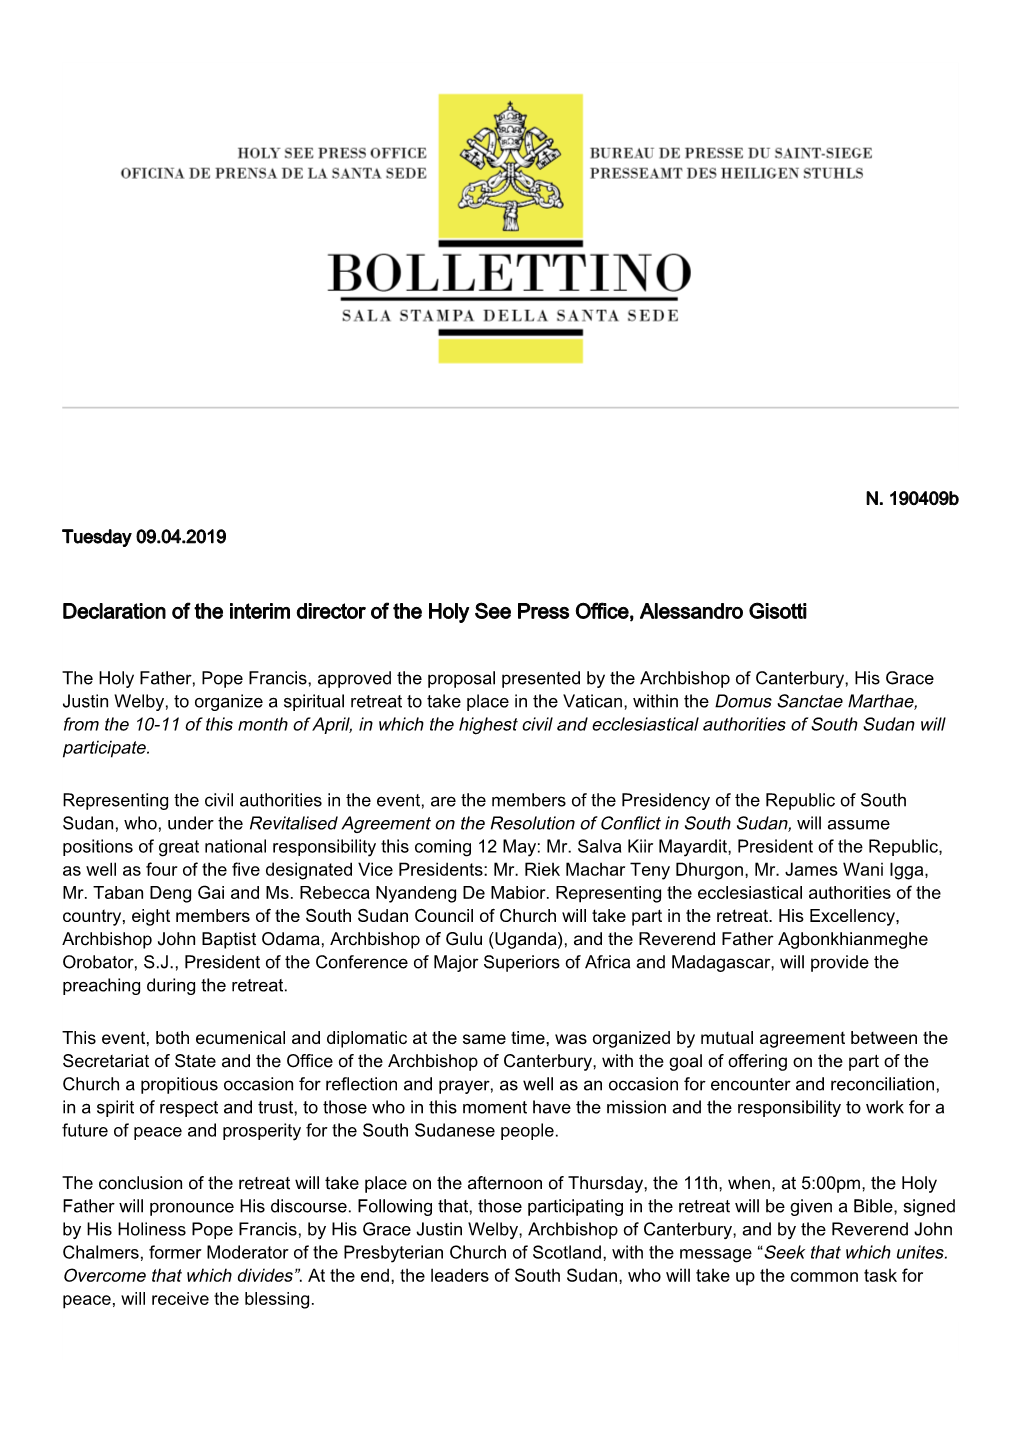 Declaration of the Interim Director of the Holy See Press Office, Alessandro Gisotti